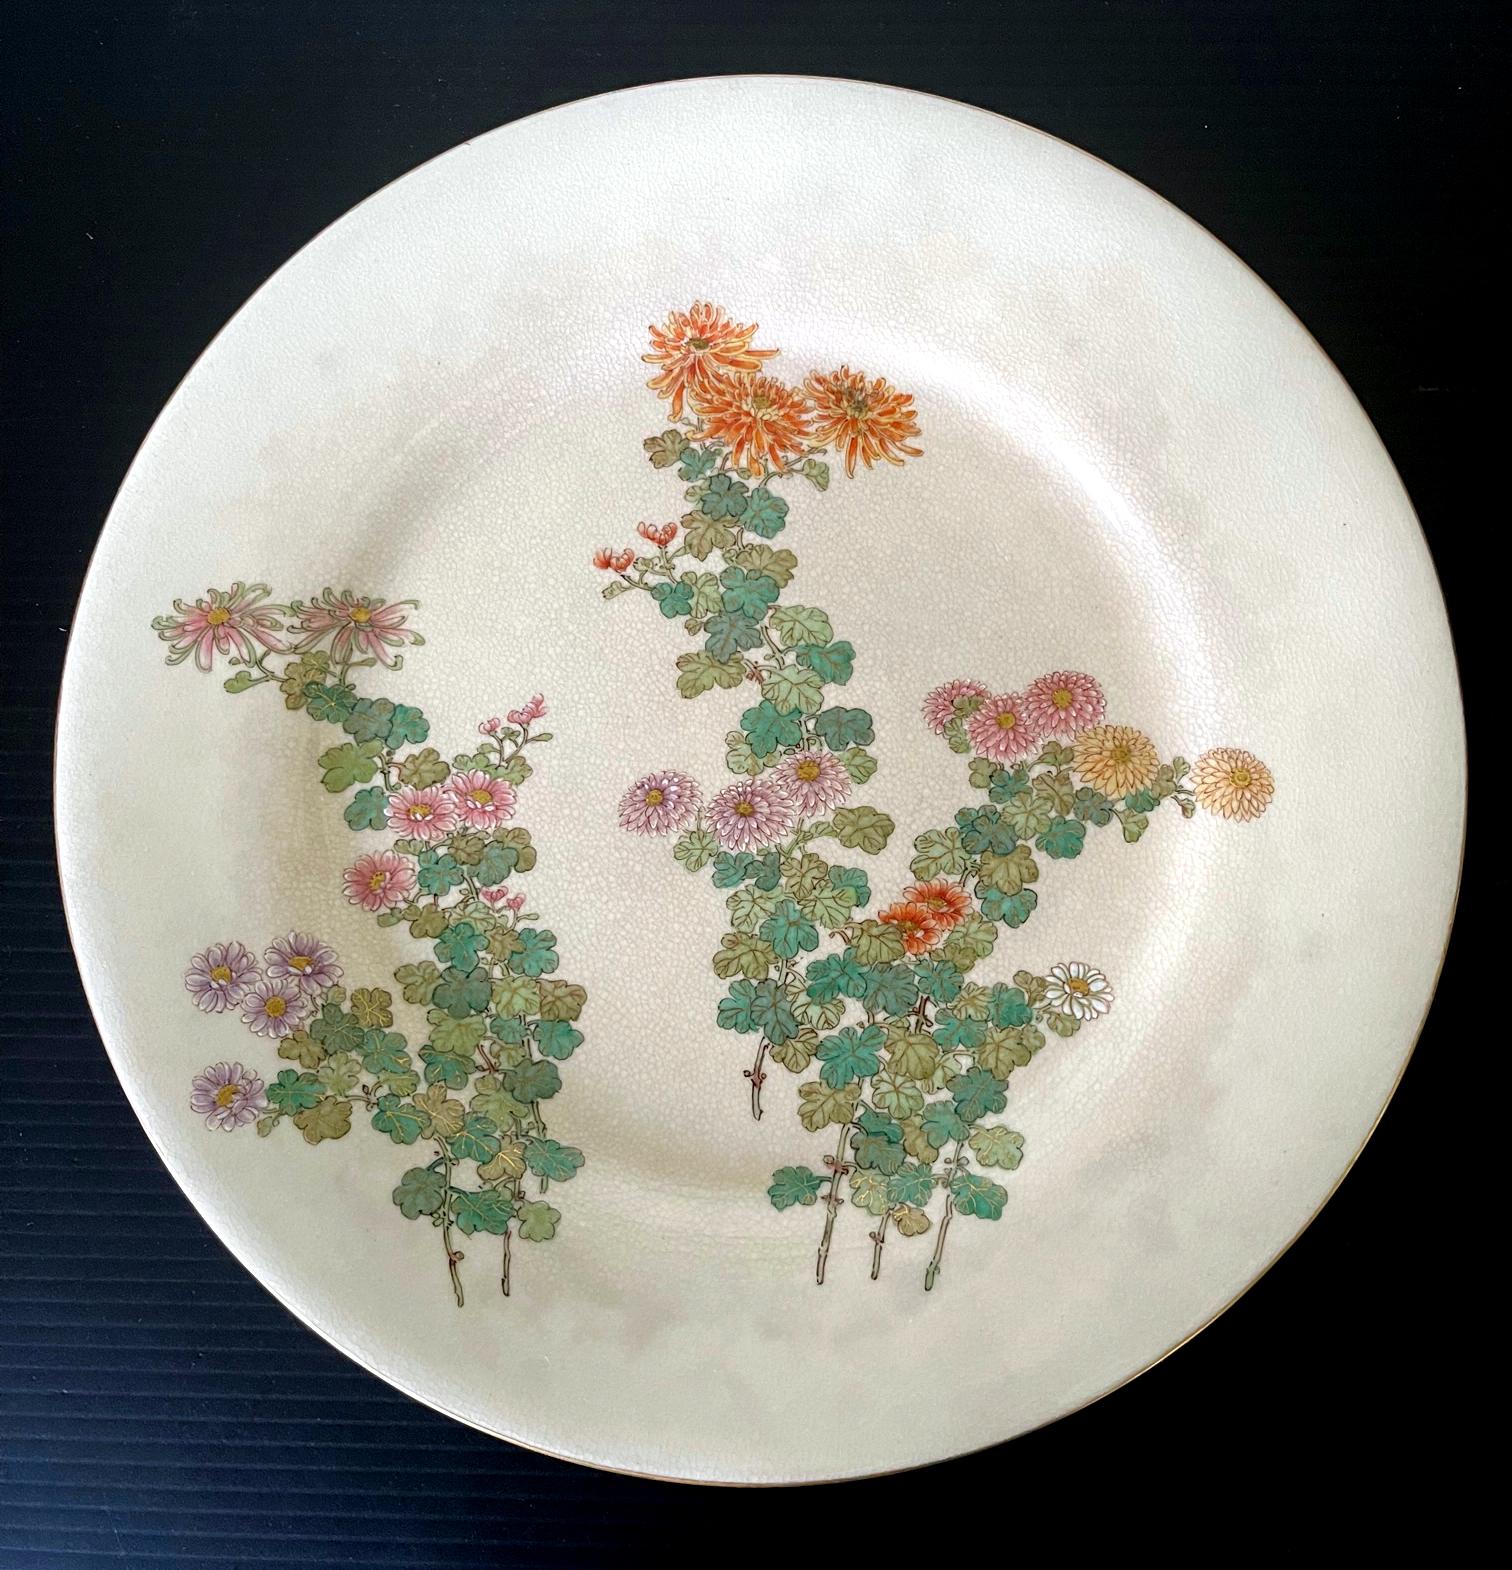 A fine Japanese ceramic satsuma plate made by Kinkozan and retailed by Yamanaka & Co. circa 1900-20s (late Meiji to early Tasho Period). The cream-color glazed plate features a very fine decoration of bundles of chrysanthemum blossoms in various